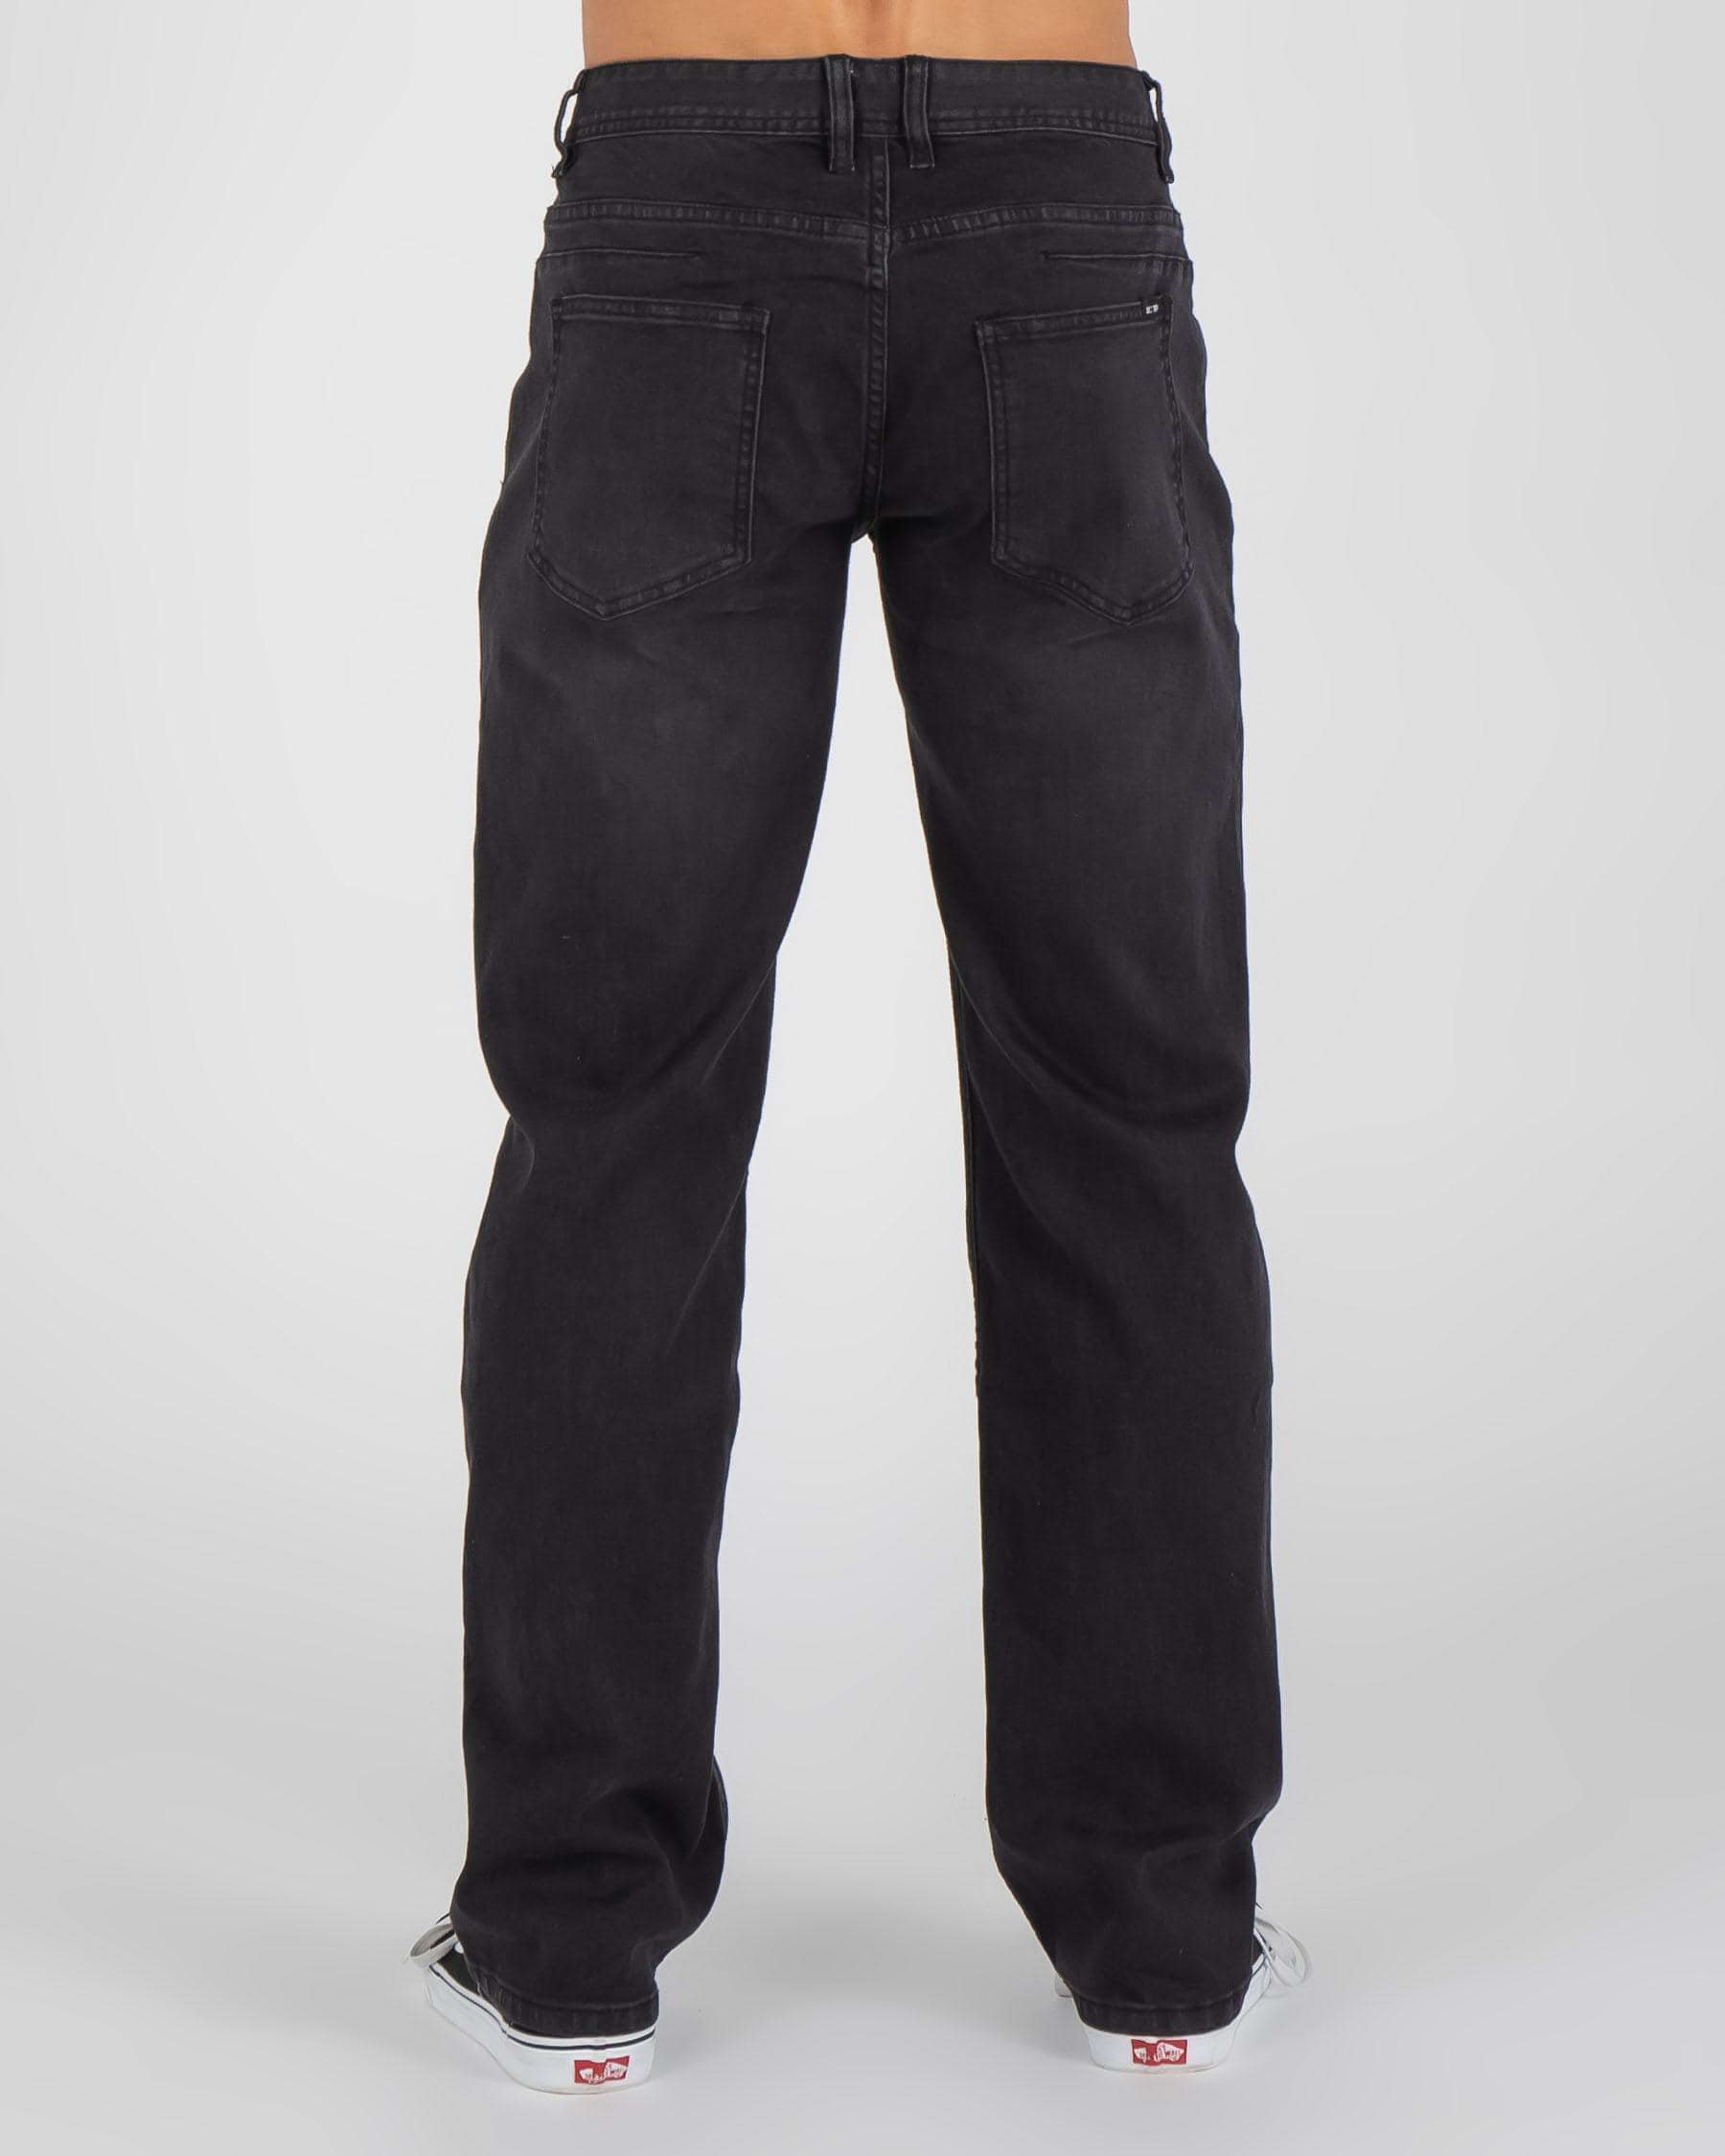 Dexter Impact Jeans In Washed Black - Fast Shipping & Easy Returns ...